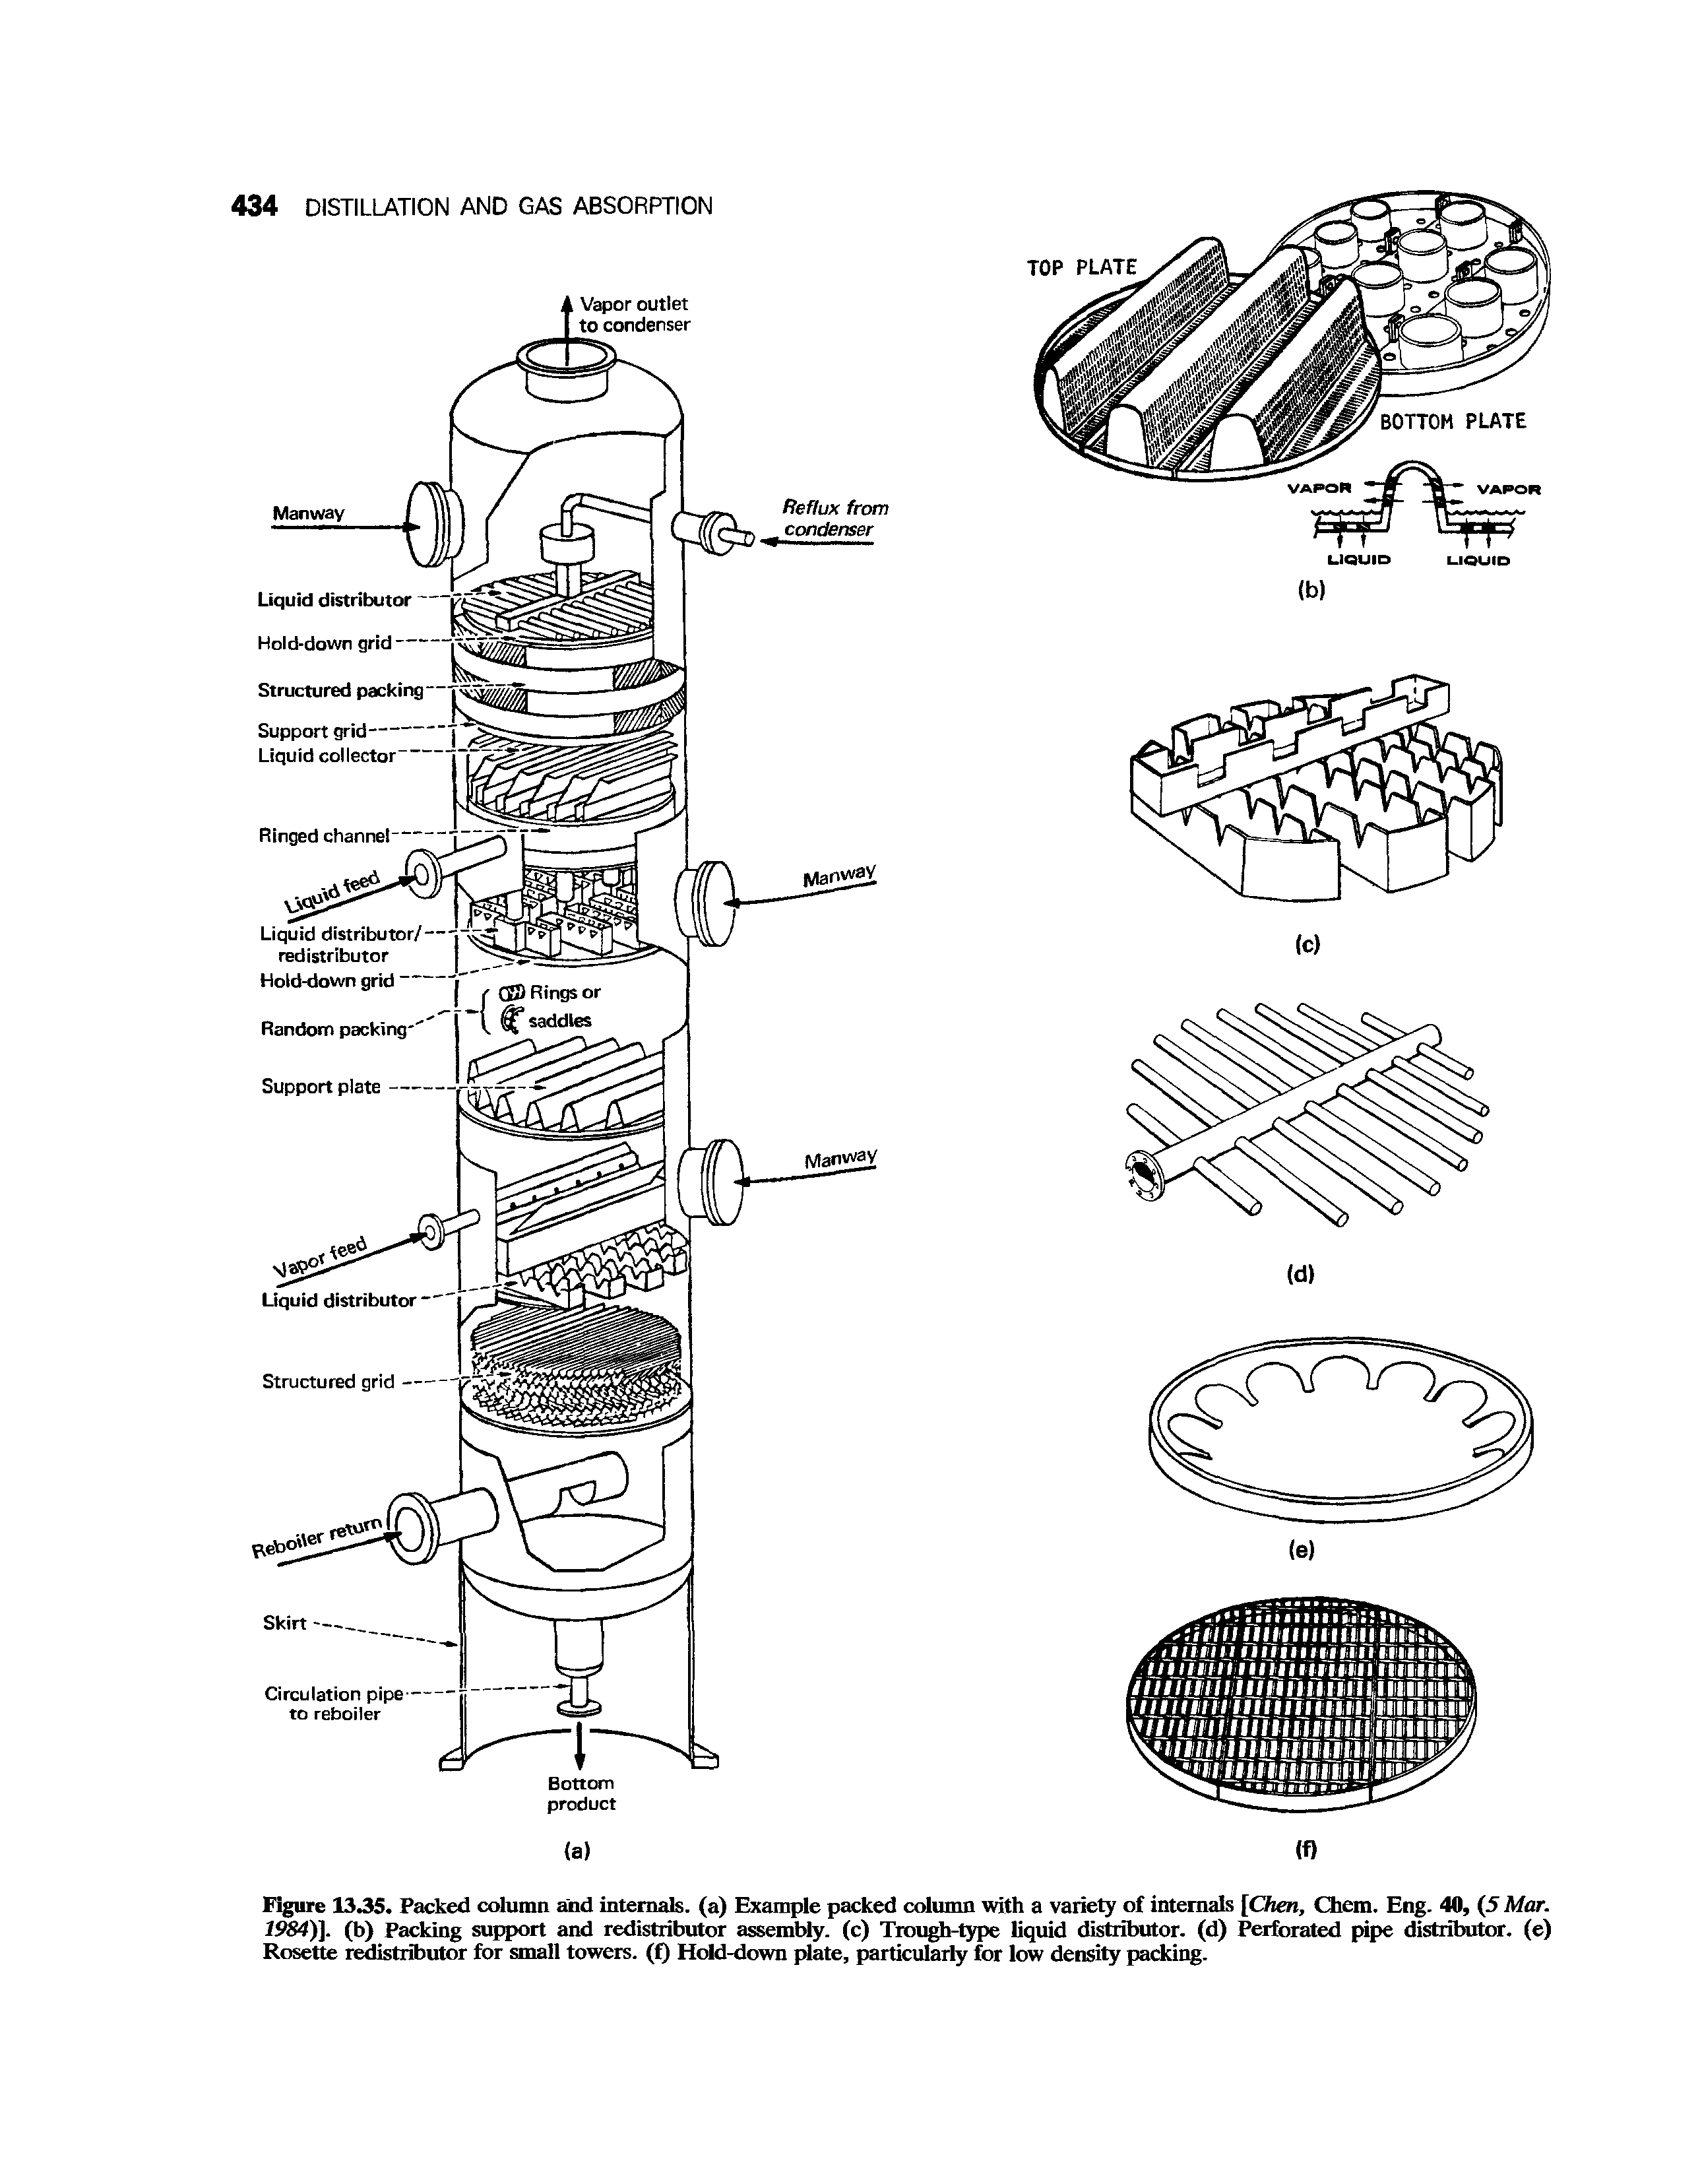 Figure 1335. Packed column and internals, (a) Example packed column with a variety of internals [Chen, Chem. Eng. 40, (5 Mar. 1984)]. (b) Packing support and redistributor assembly, (c) Trough-type liquid distributor, (d) Perforated pipe distributor, (e) Rosette redistributor for small towers. (0 Hold-down plate, particularly for low density packing.